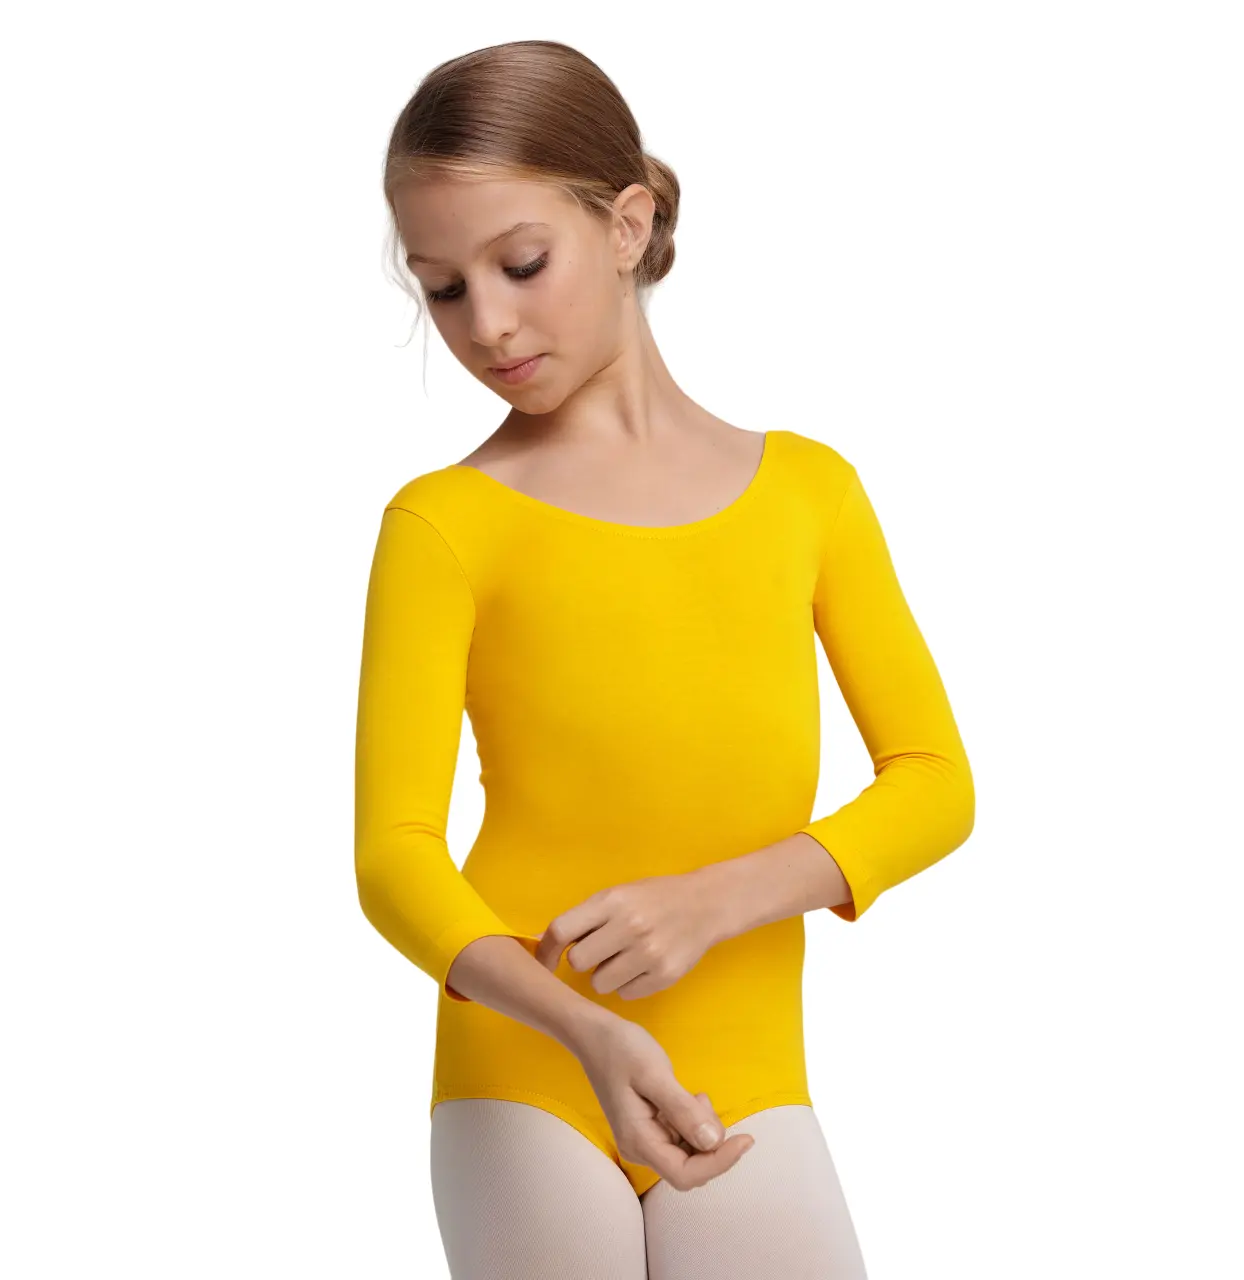 High quality dance ballet wear for kids and teenagers ladies' swimsuits for ballet and gymnastics yellow color leotards